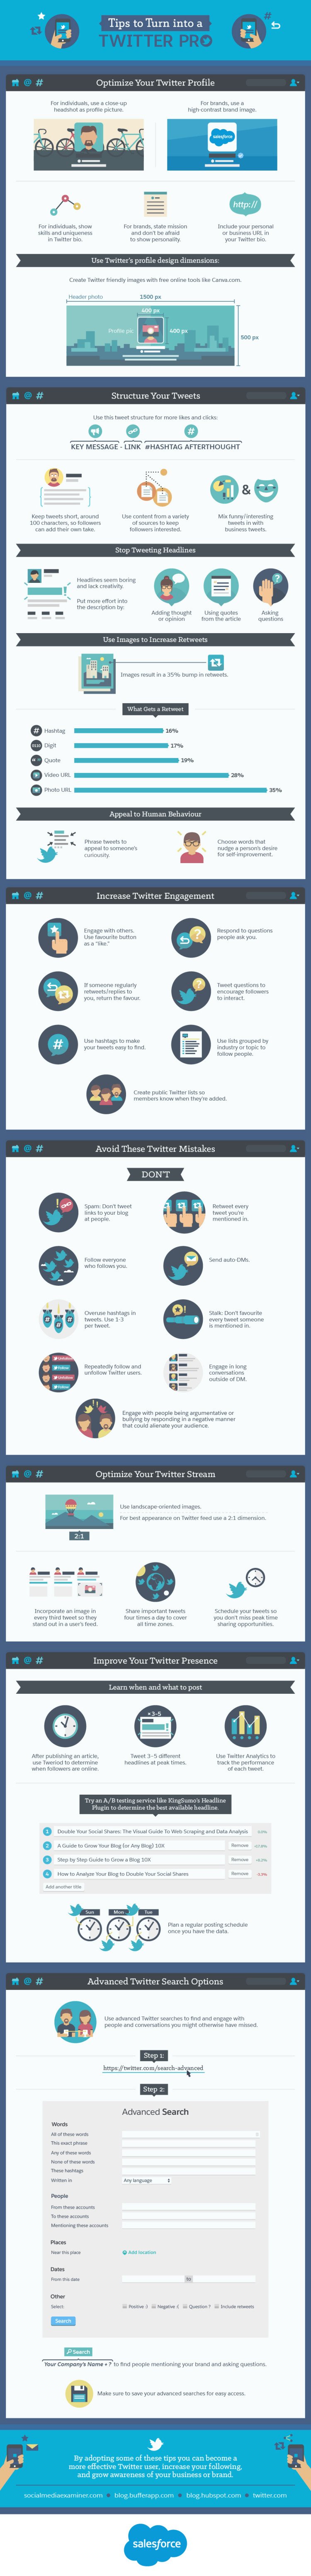 Twitter Tips to Turn into a Twitter Pro [Infographic]